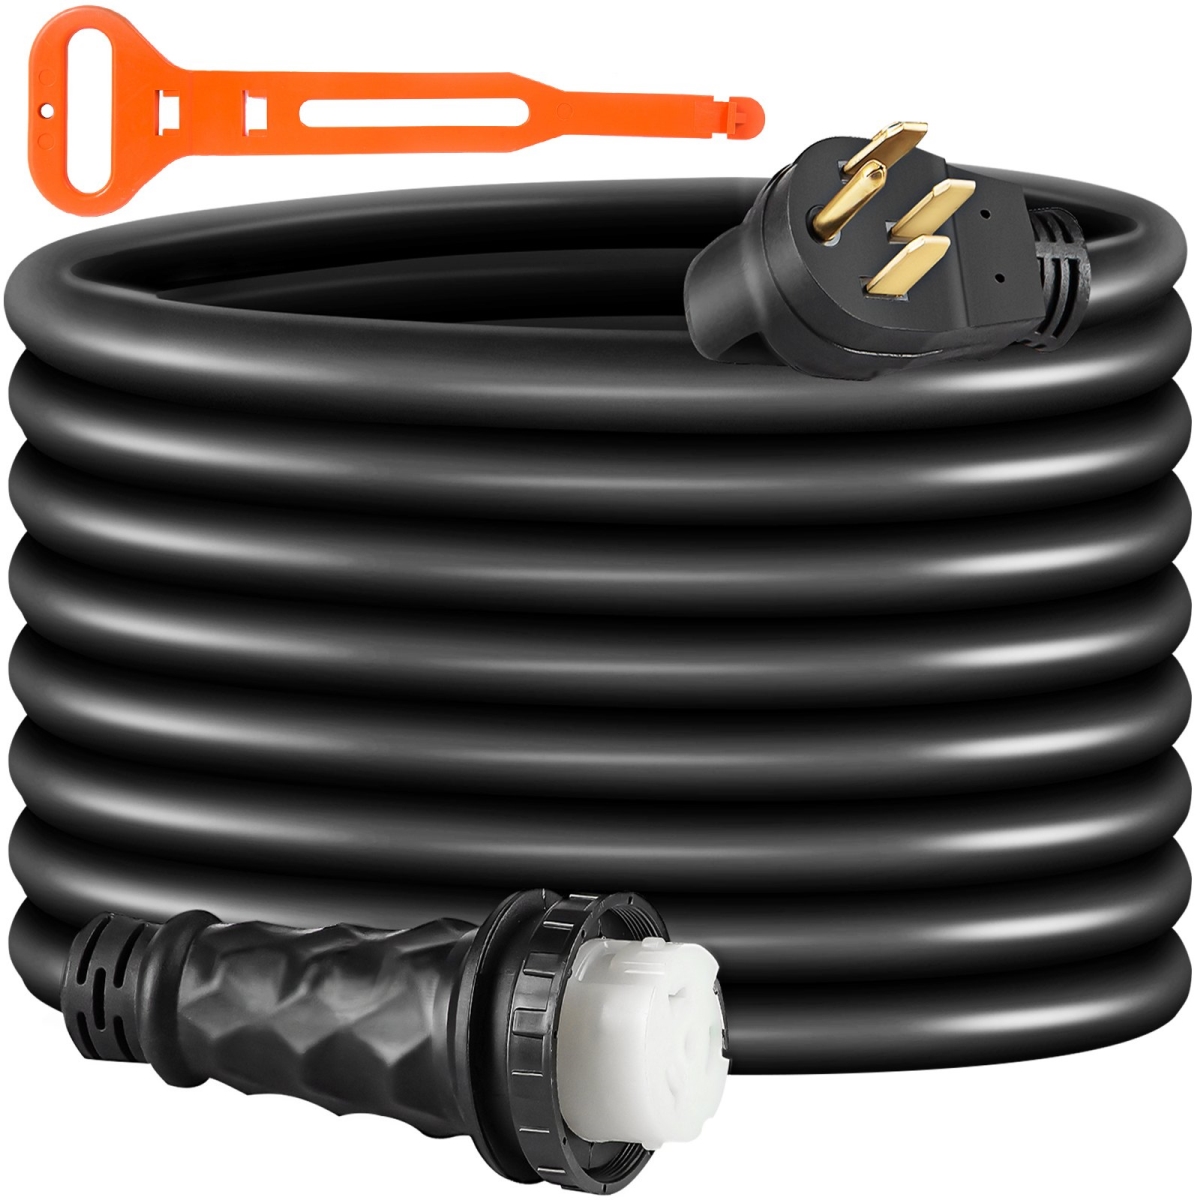 Picture of Vevor HJLJQYT36X50DSK01V1 36 ft. 50A RV Shore Power Extension Cord